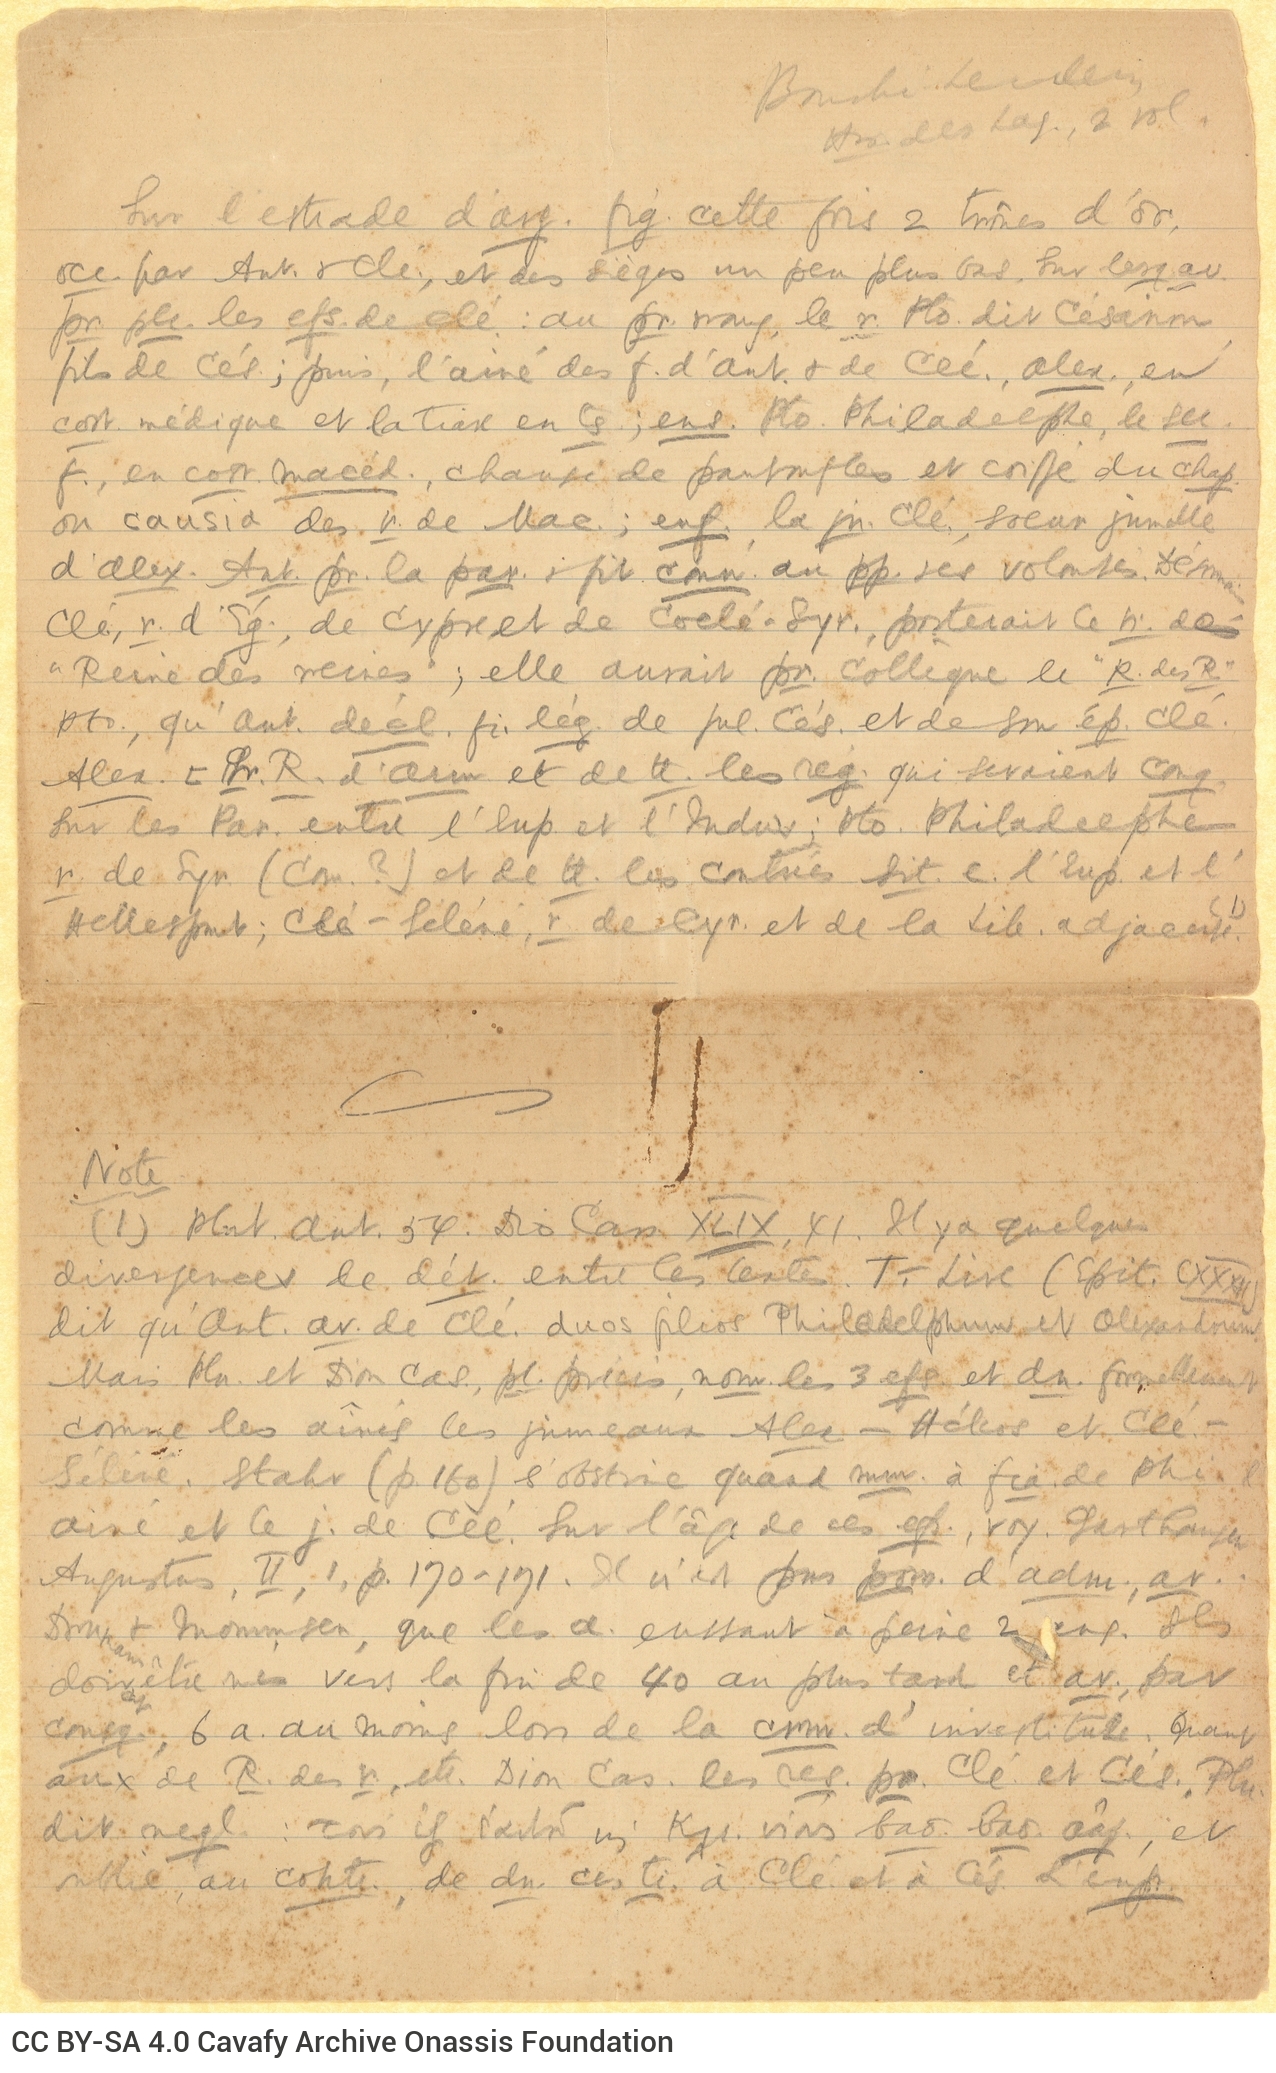 Abbreviated notes in pencil on the first page of a ruled double sheet notepaper. Draft of an official letter and notes, al